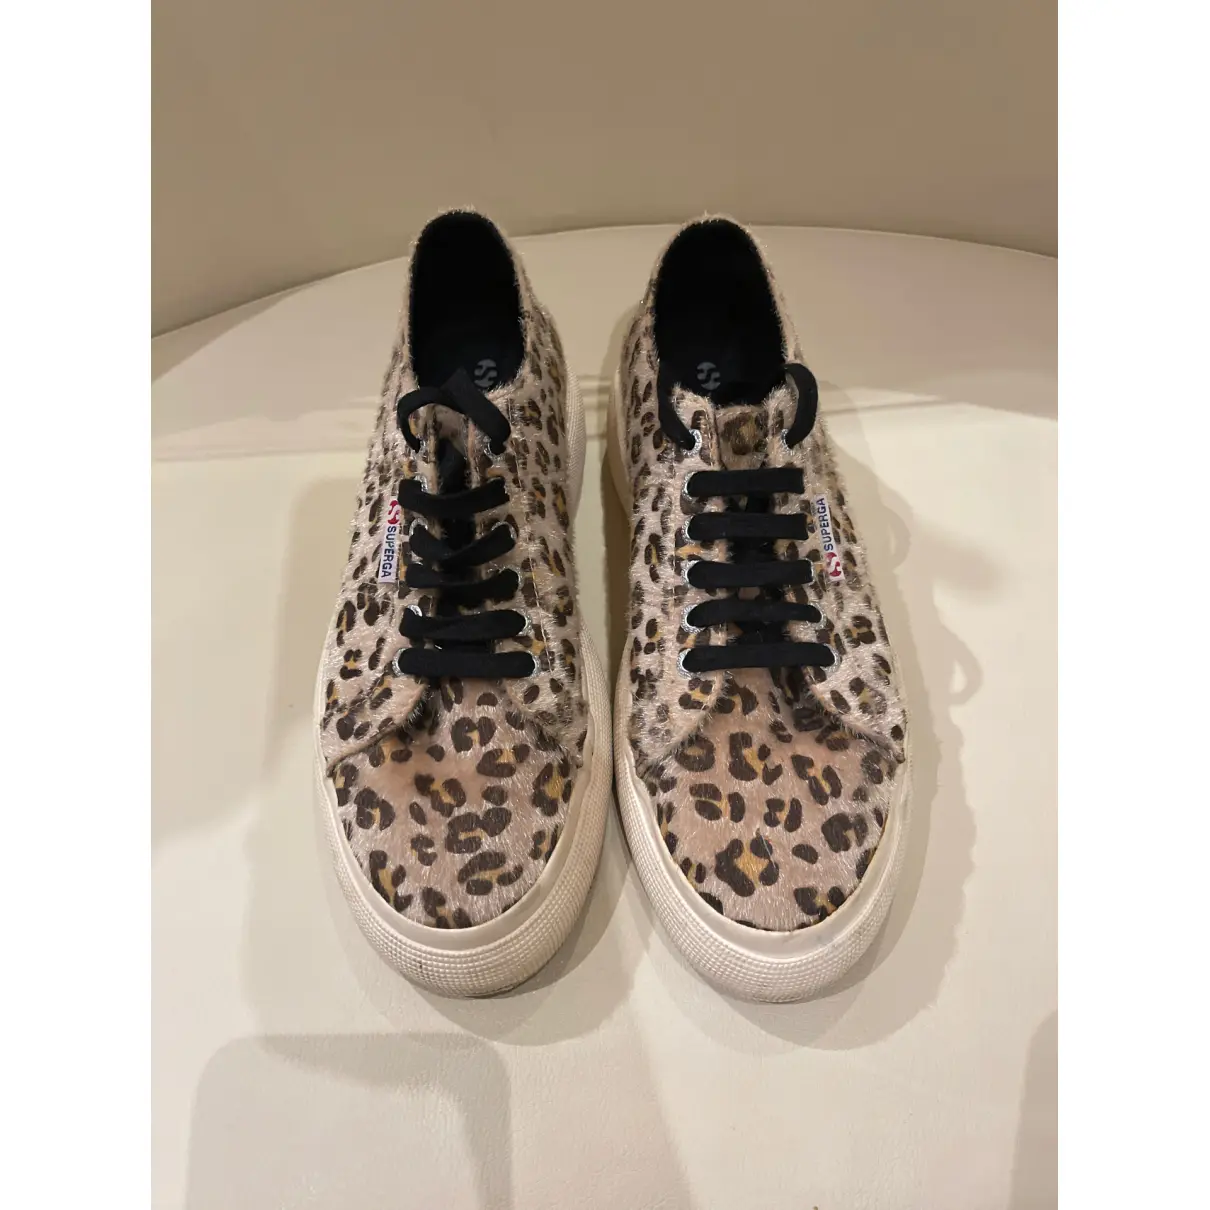 Buy Superga Pony-style calfskin trainers online